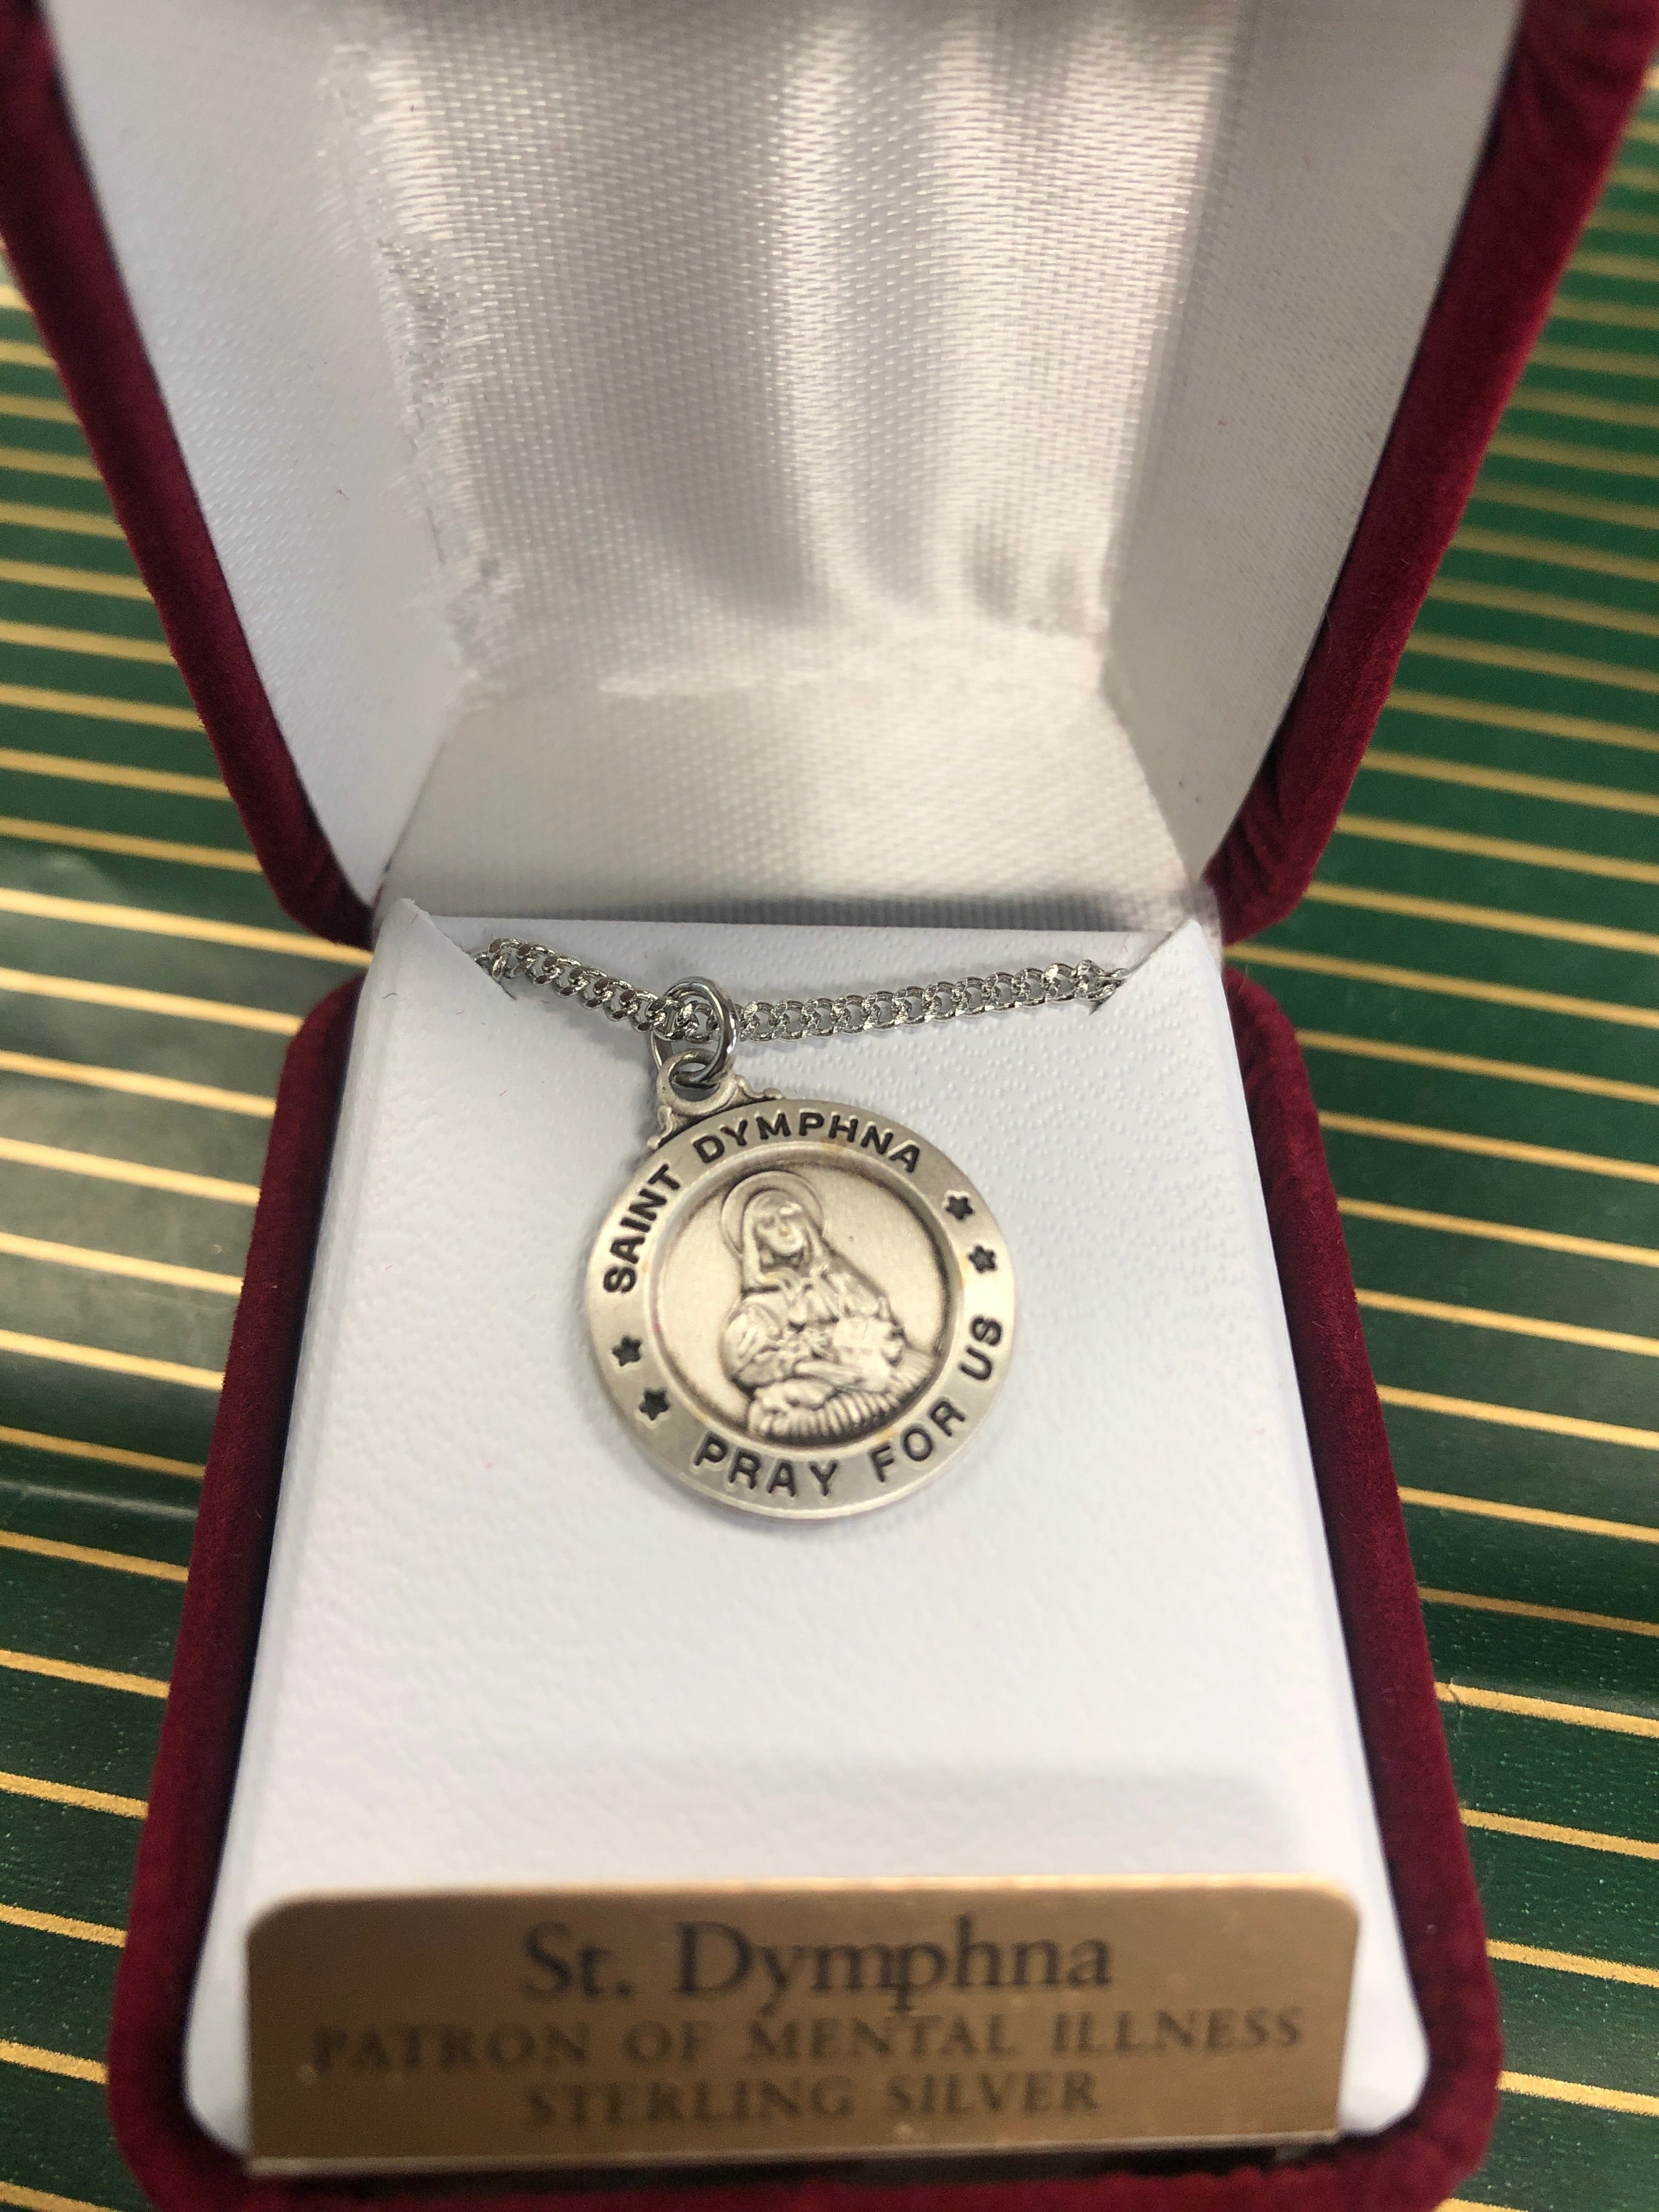 St. Dymphna sterling silver medal